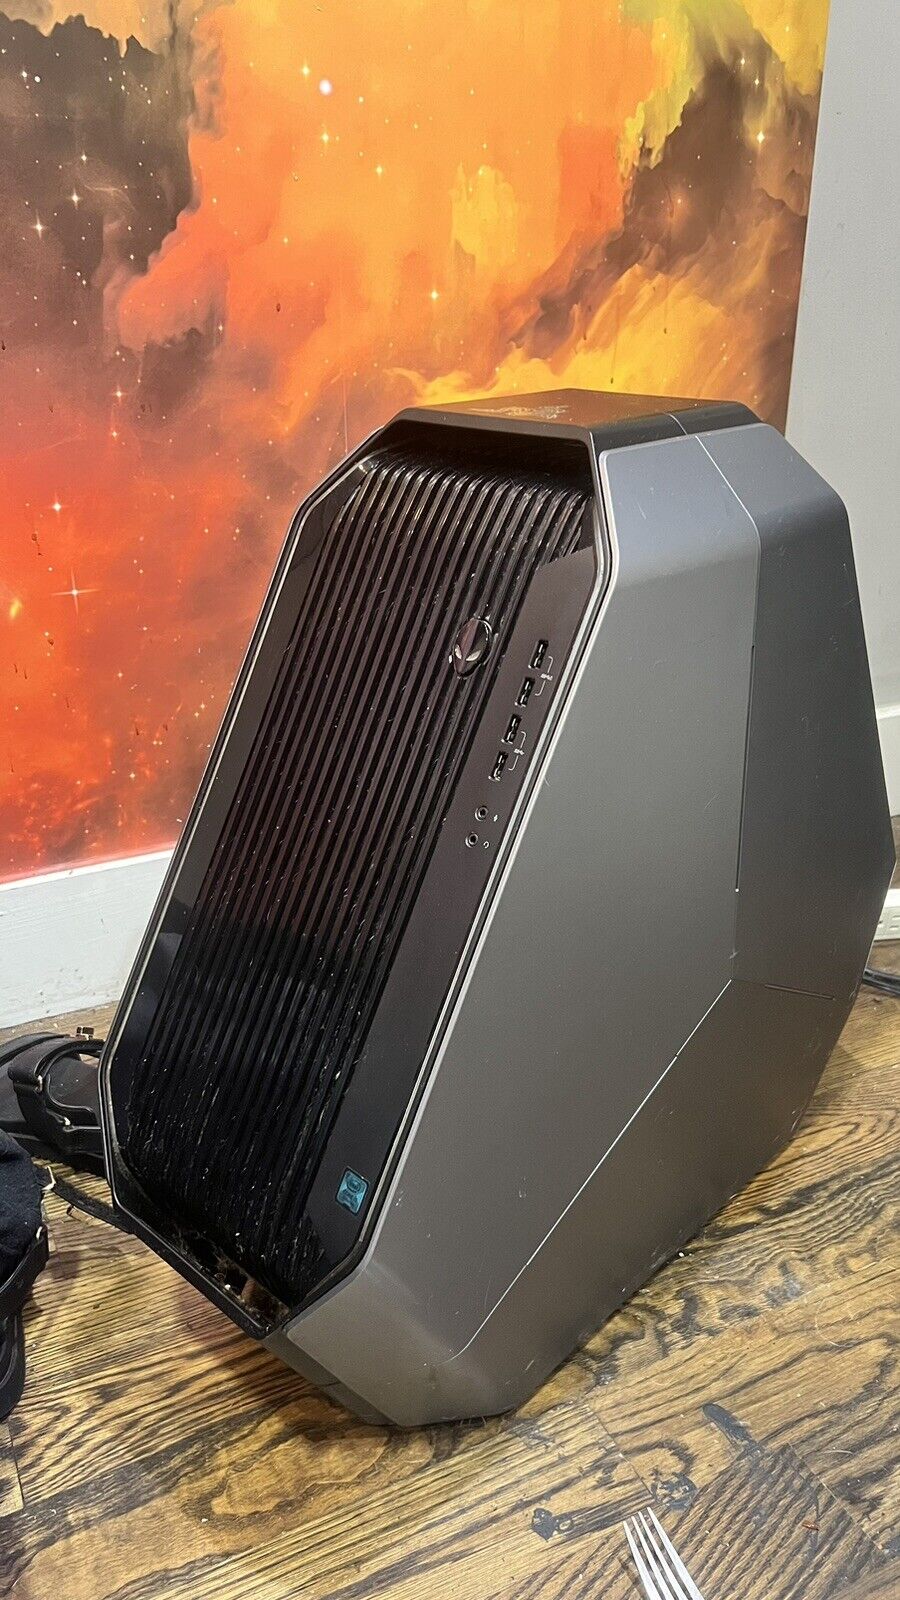 Alienware Area 51 R5 Gaming Tower PC